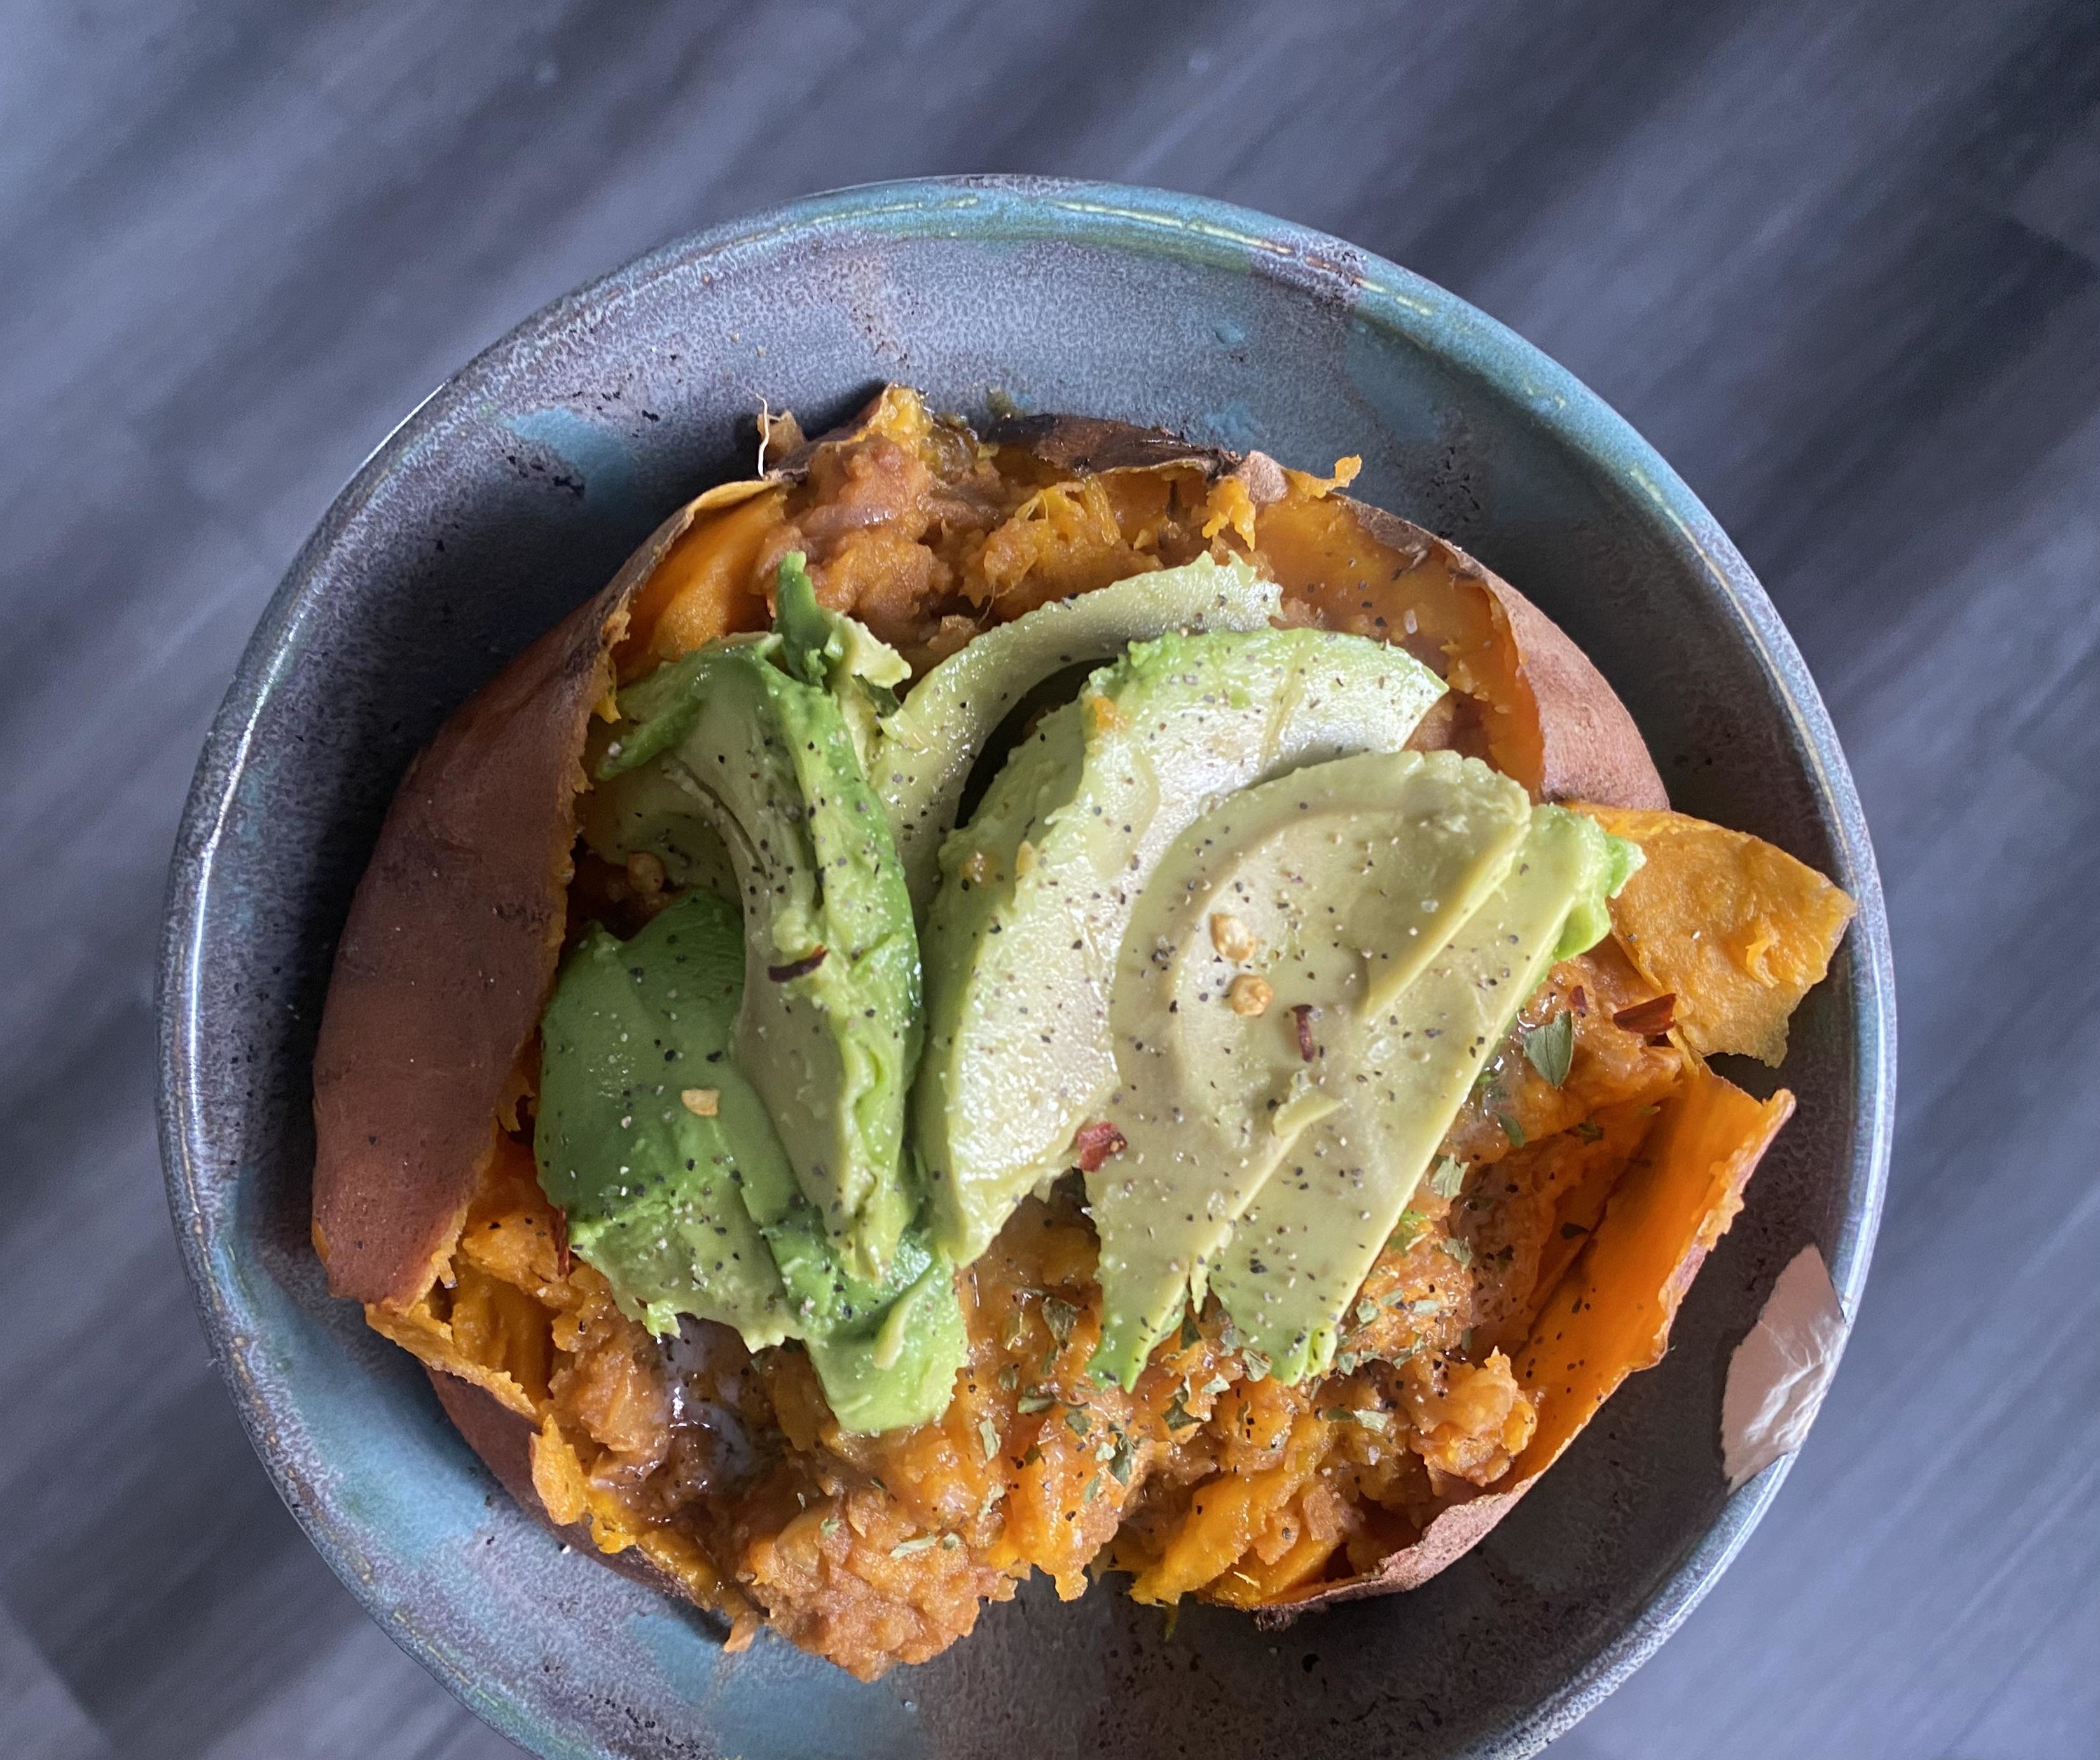 A bowl of sweet potato nachos topped with avocado slices and a sprinkle of herbs